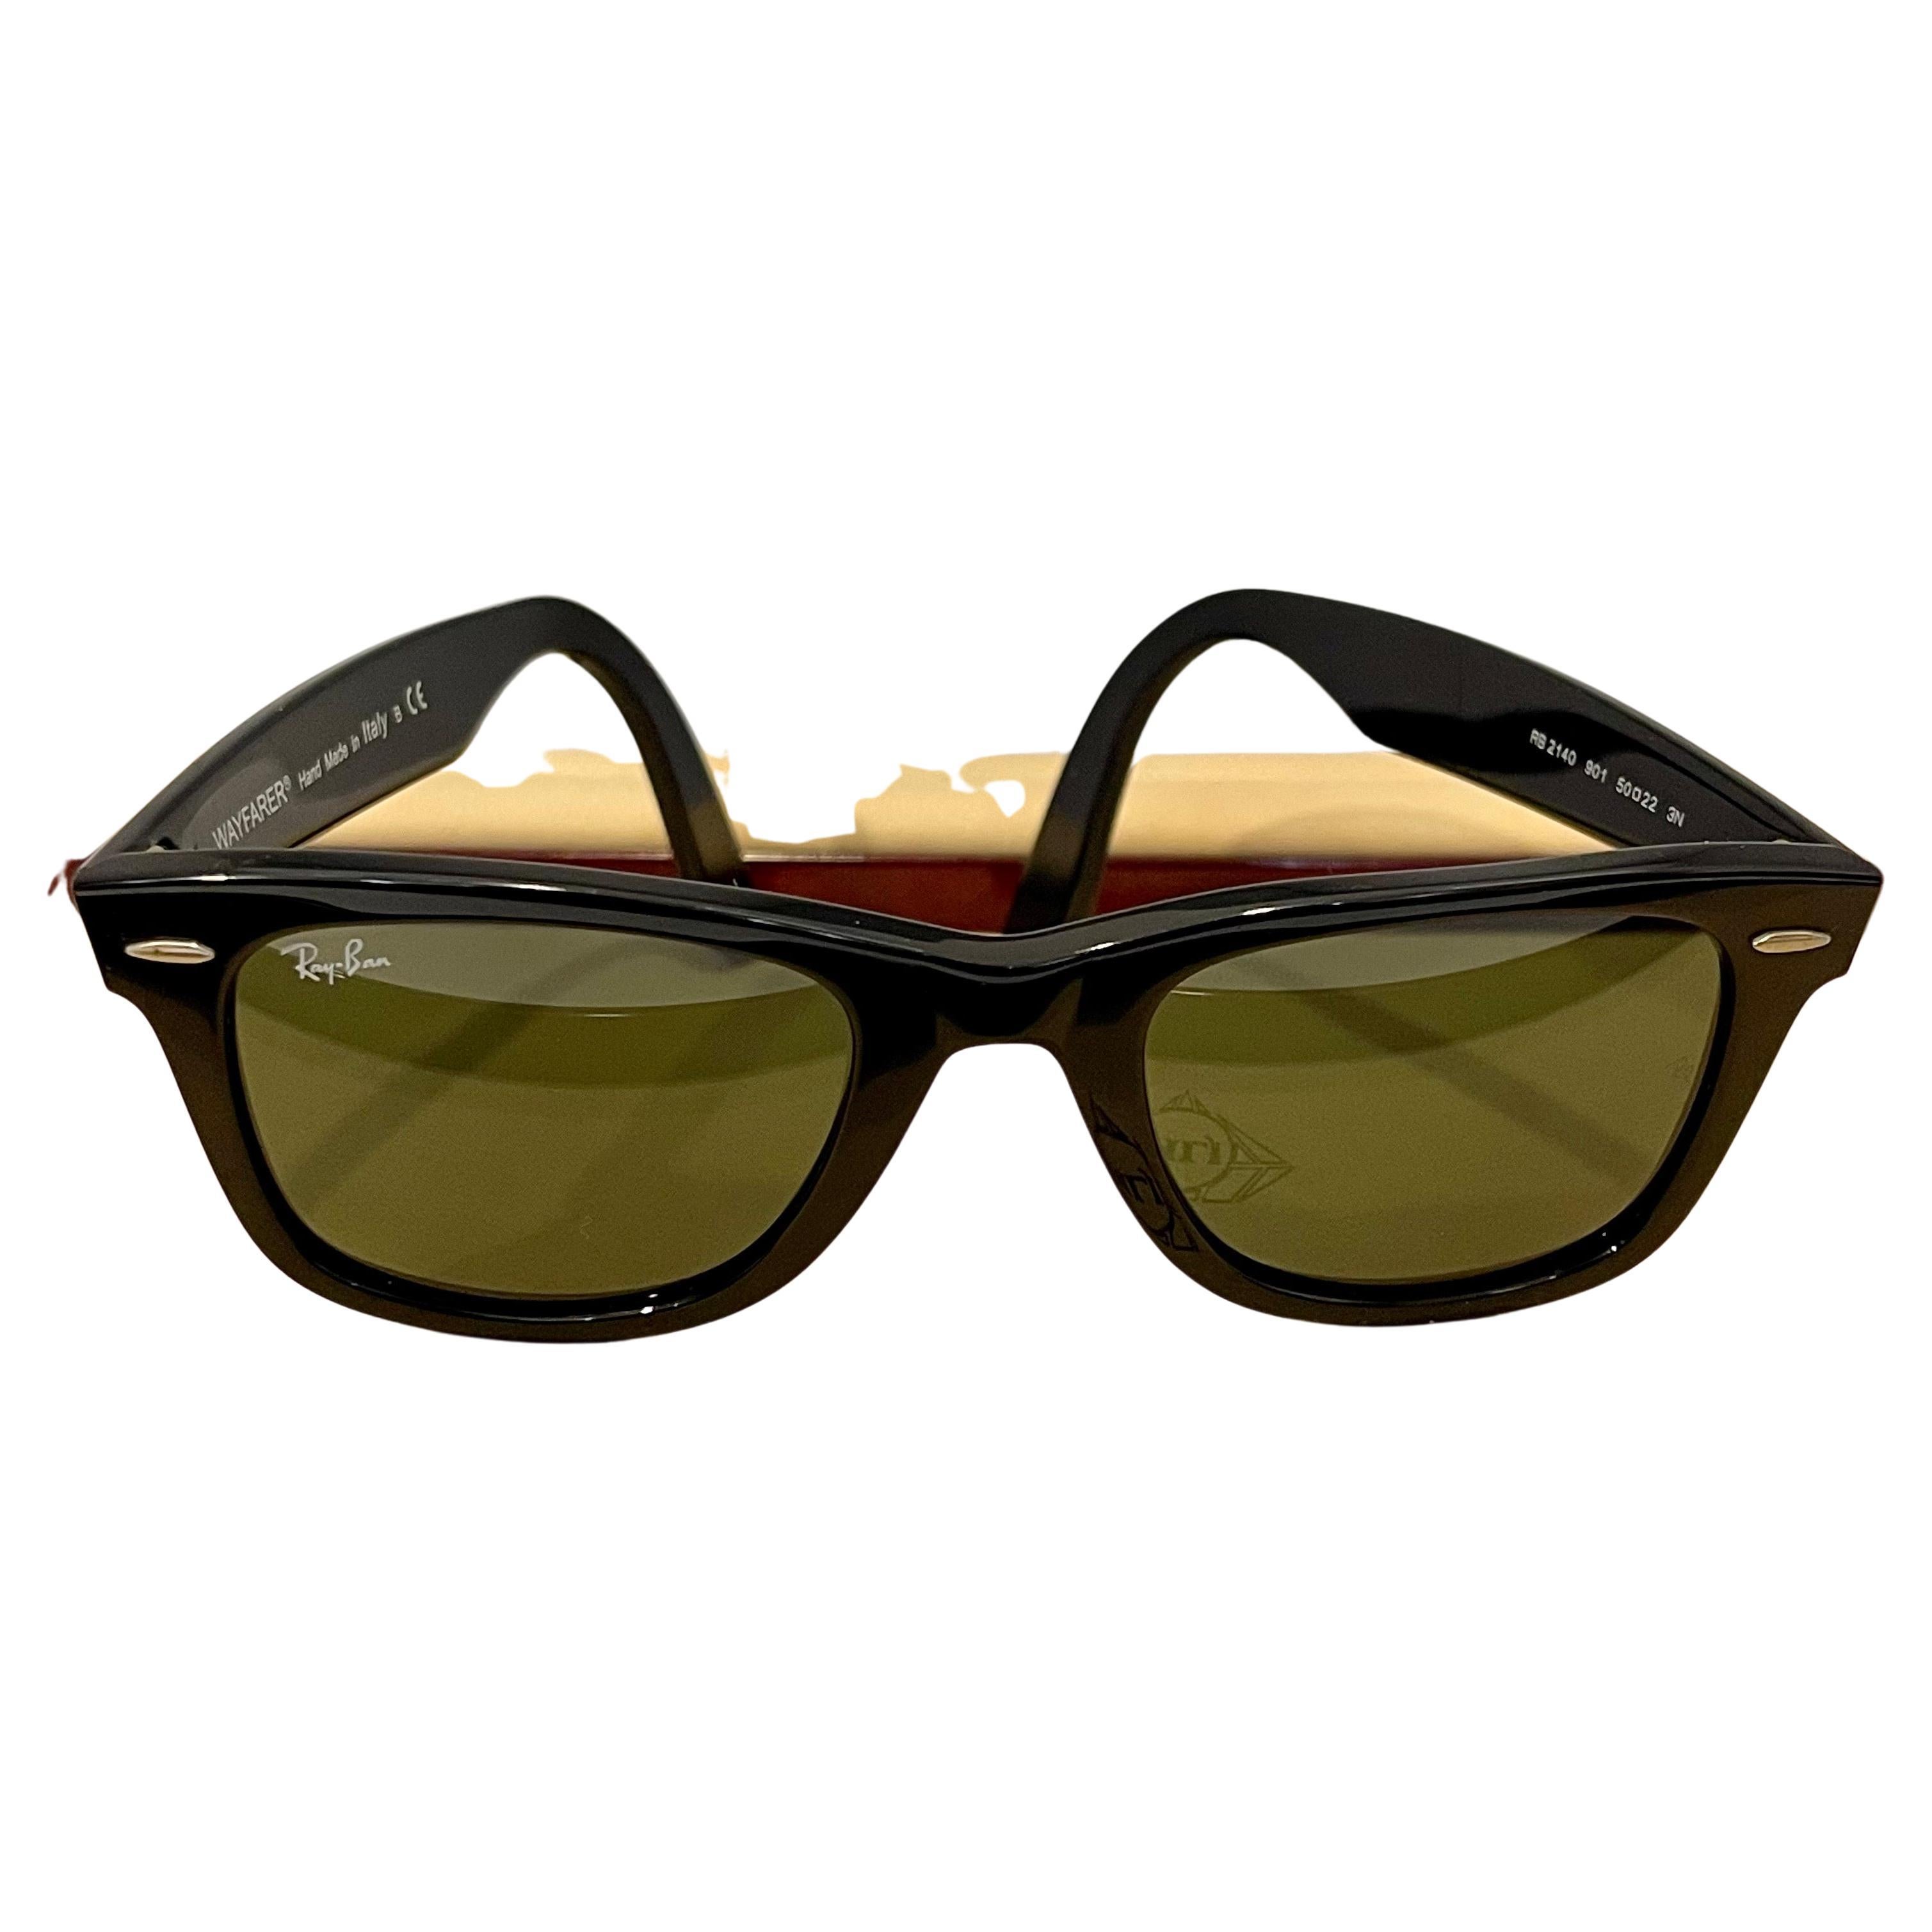 
Ray Ban RB2140 901 50 22 3N
Hand Made in Italy
Black/Green Sunglasses, Standard   size
Brand New
Comes with cover from Ray Ban
all pictures of the original sunglass
Ray-Ban in gold letters on both sides and on one lenses


